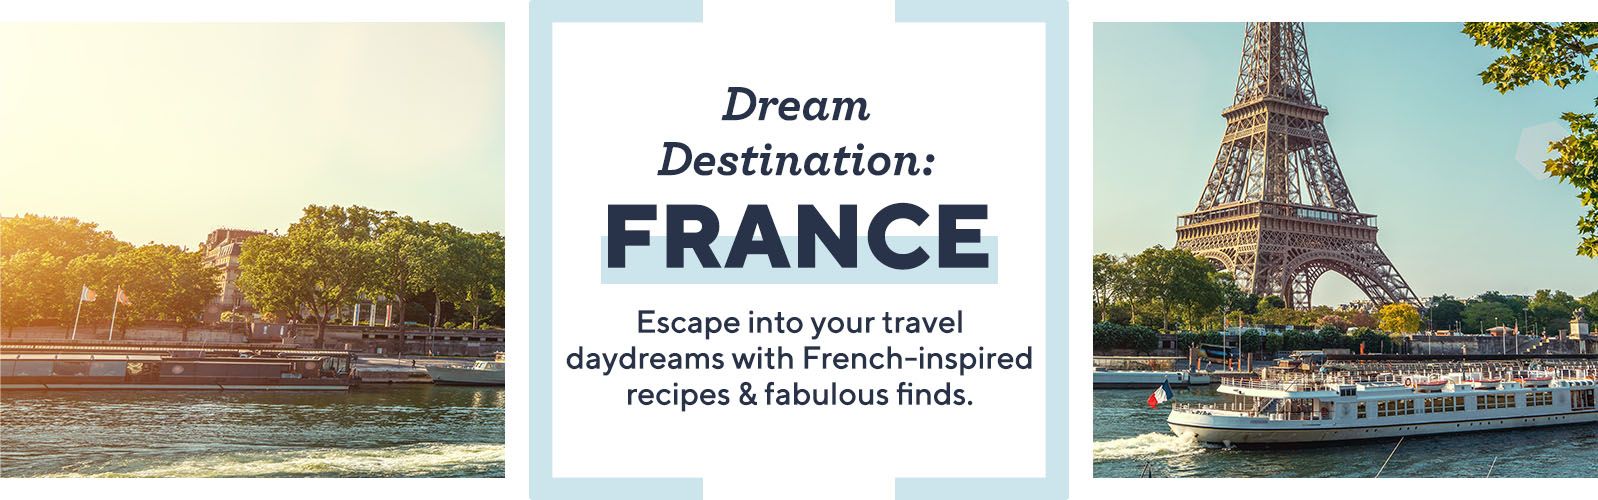 Dream Destination: France. Escape into your travel daydreams with French-inspired recipes & fabulous finds.